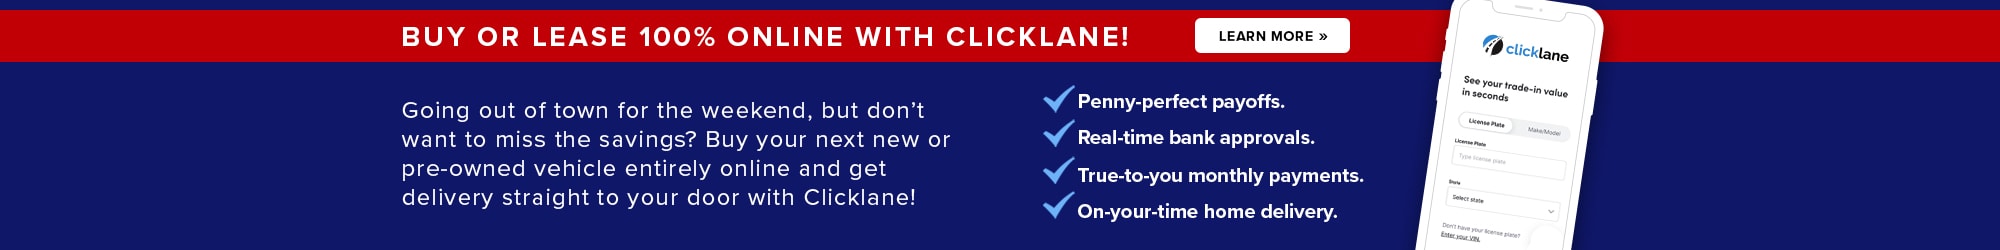 Clicklane Online Car Buying